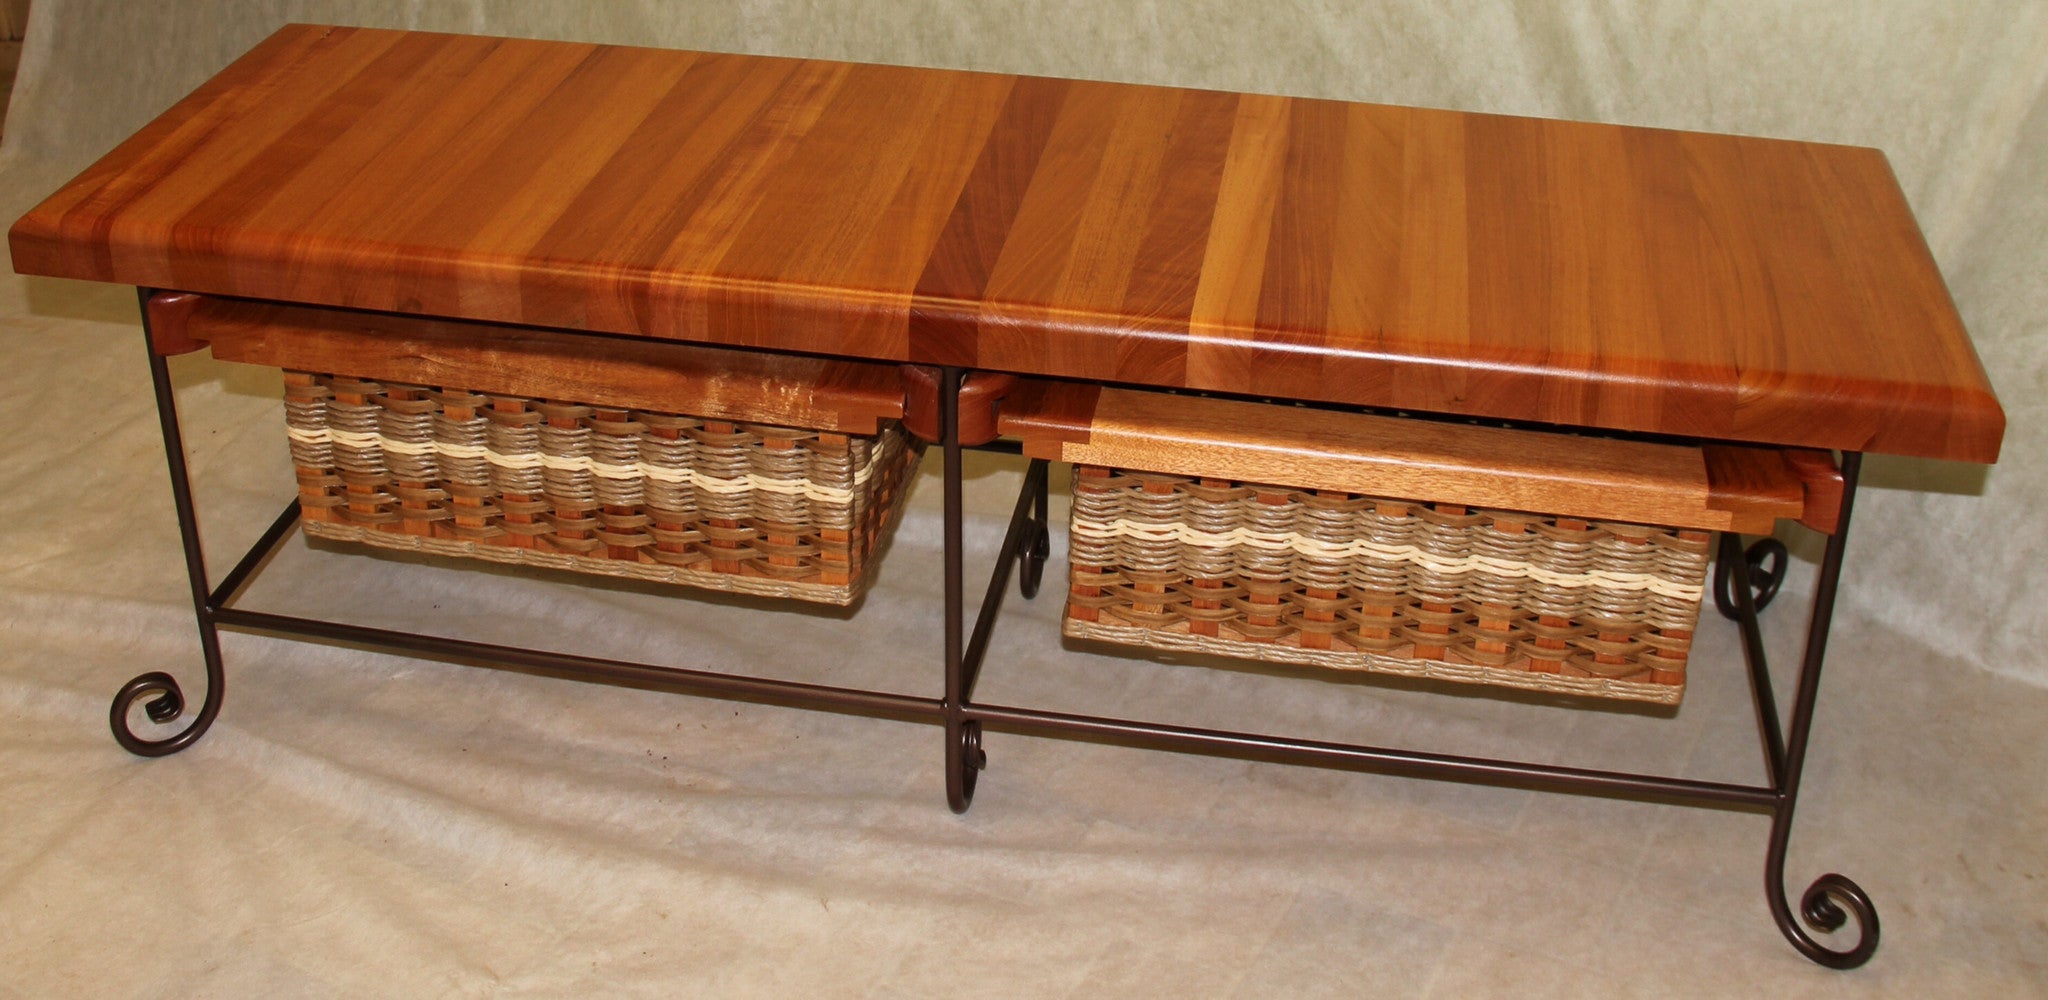 Table-19x52 Coffee Table/Bench